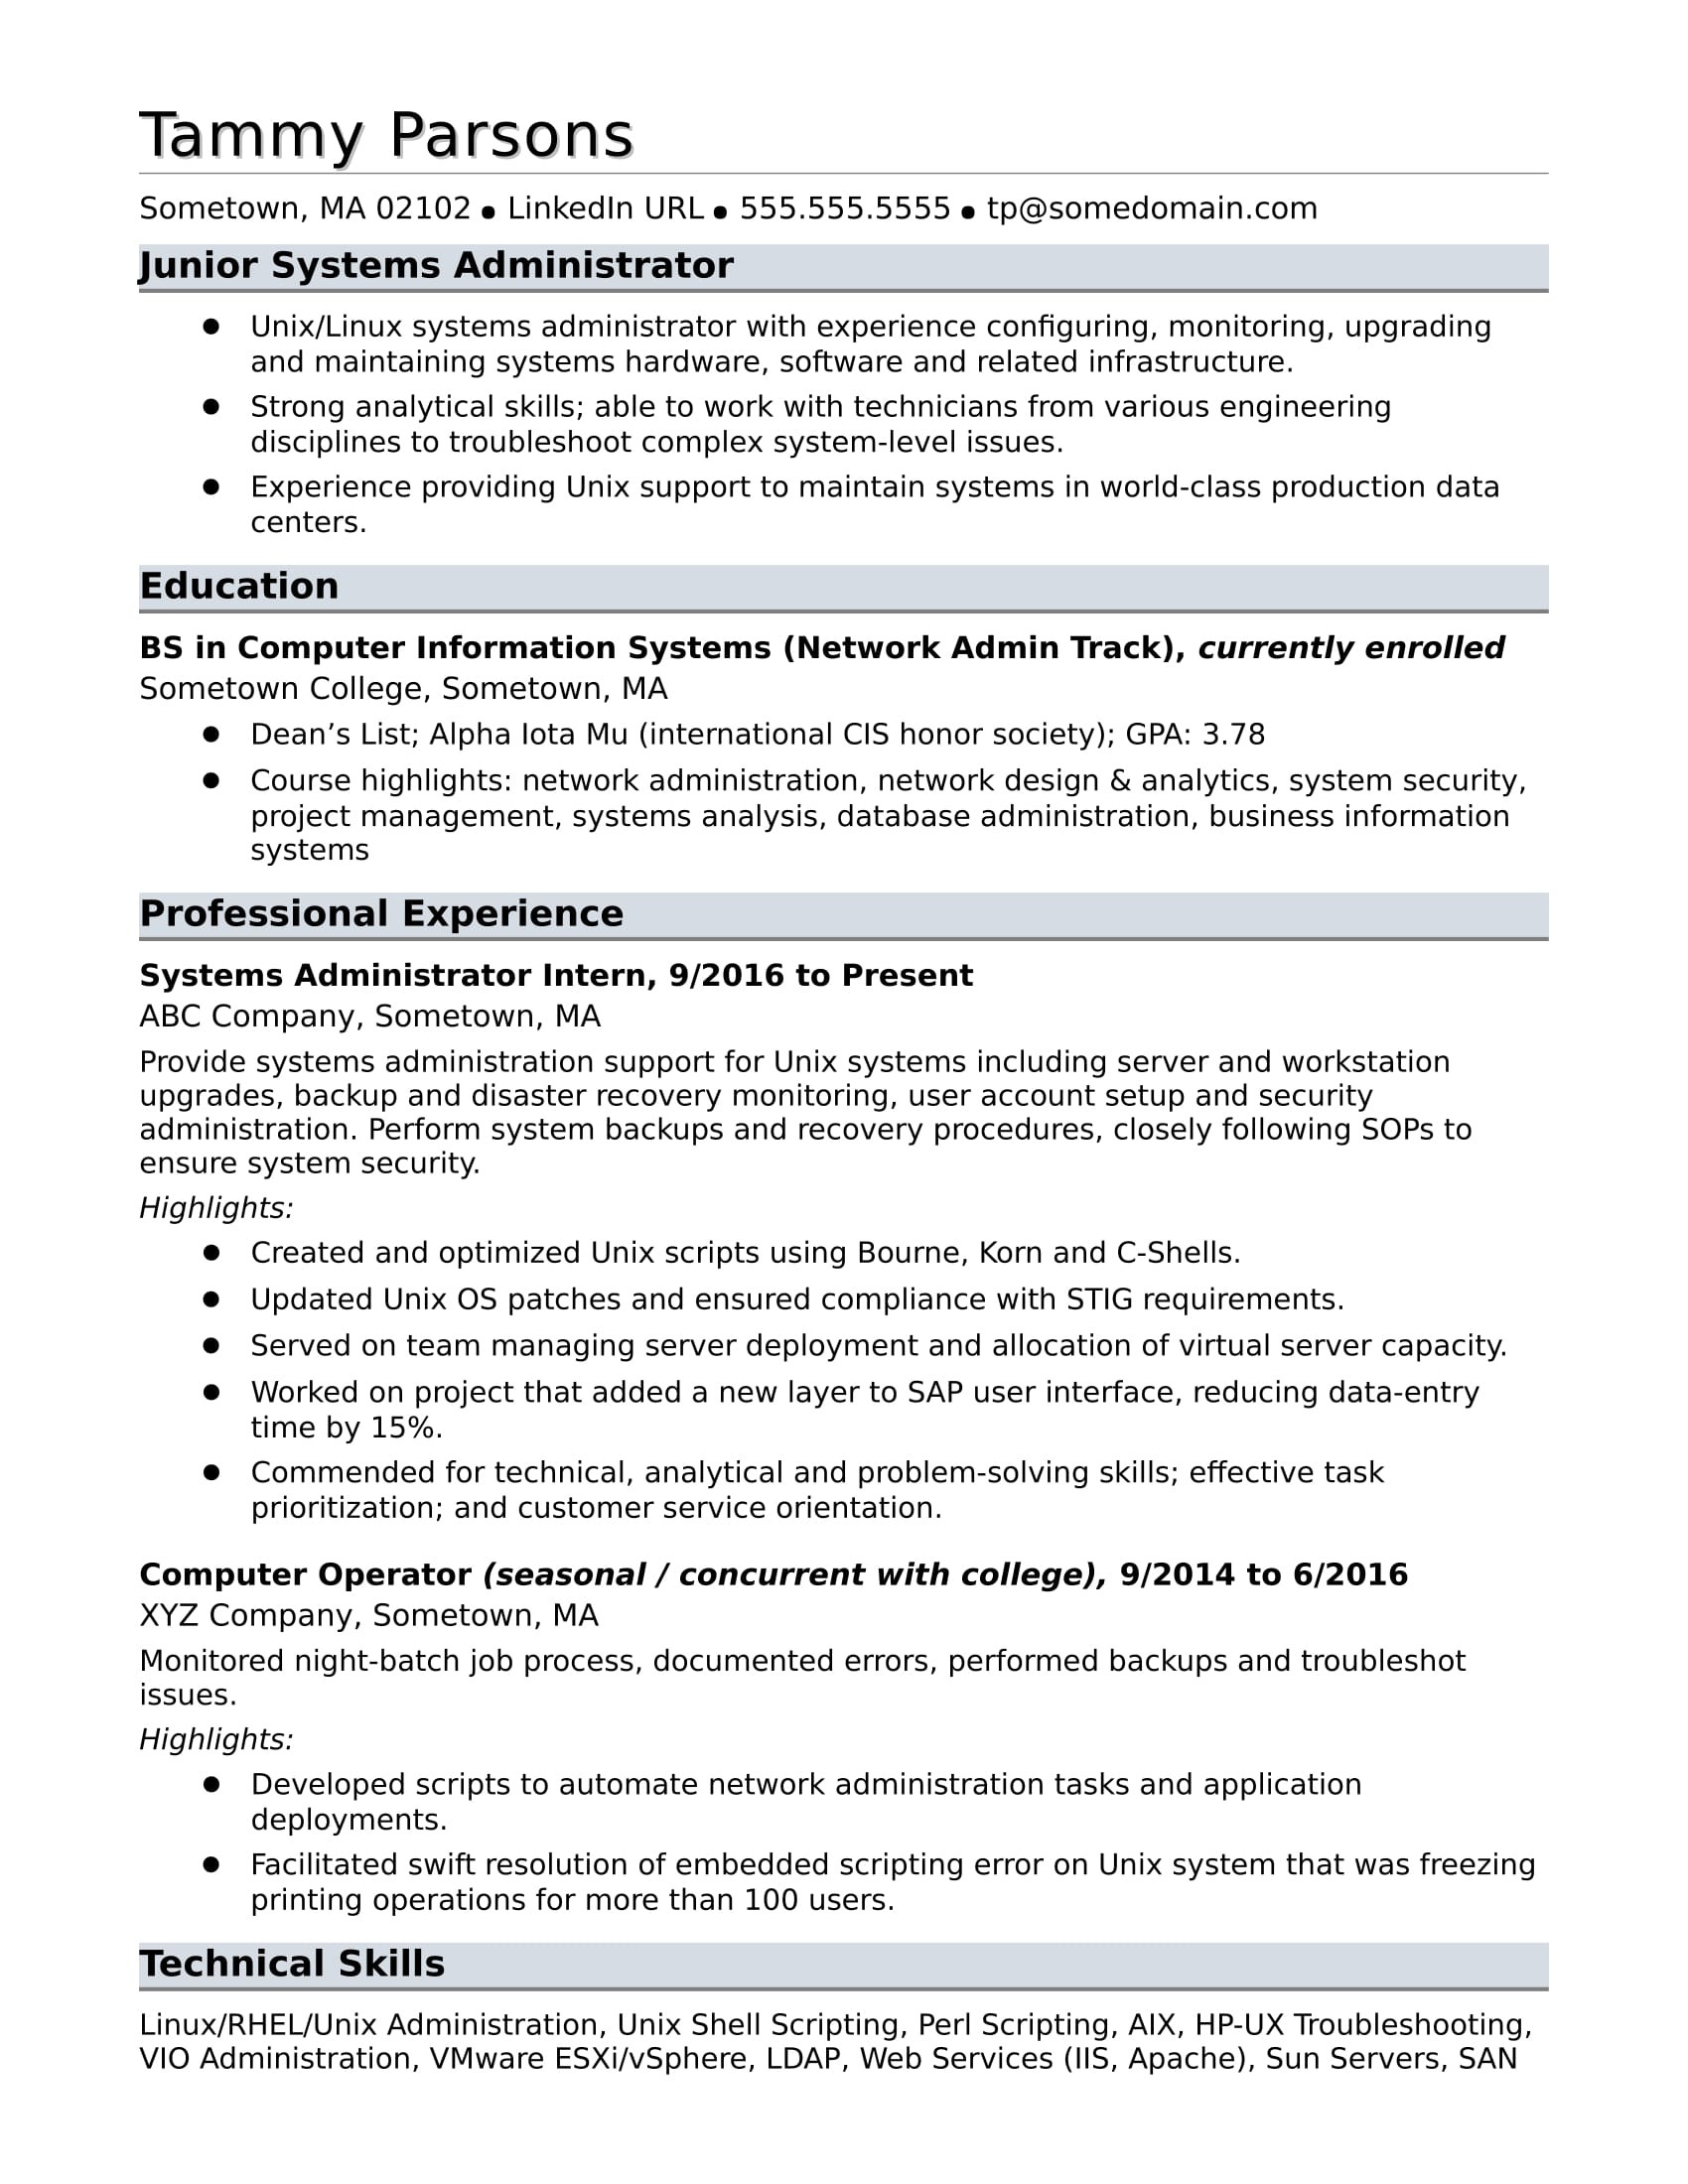 Sample Resume Strong Analytical Skills Example Sample Resume for An Entry-level Systems Administrator Monster.com